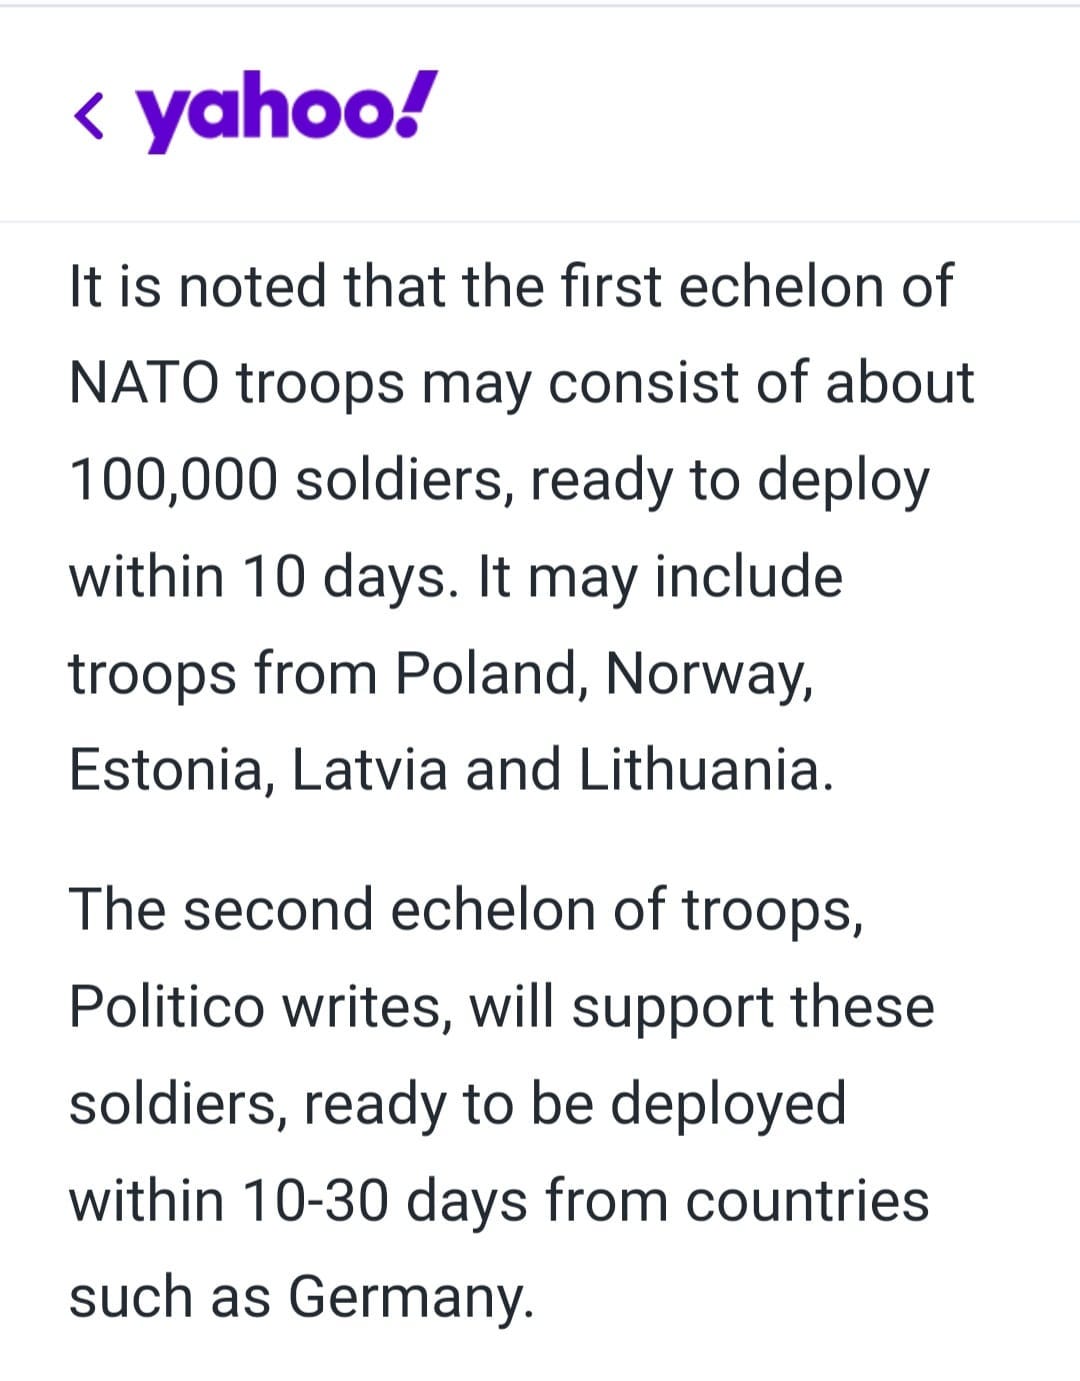 May be an image of text that says '< yahoo! It is noted that the first echelon of NATO troops may consist of about 100,000 soldiers, ready to deploy within 10 days It may include troops from Poland, Norway, Estonia, Latvia and Lithuania. The second echelon of troops, Politico writes, will support these soldiers, ready to be deployed within 10-30 days from countries such as Germany.'